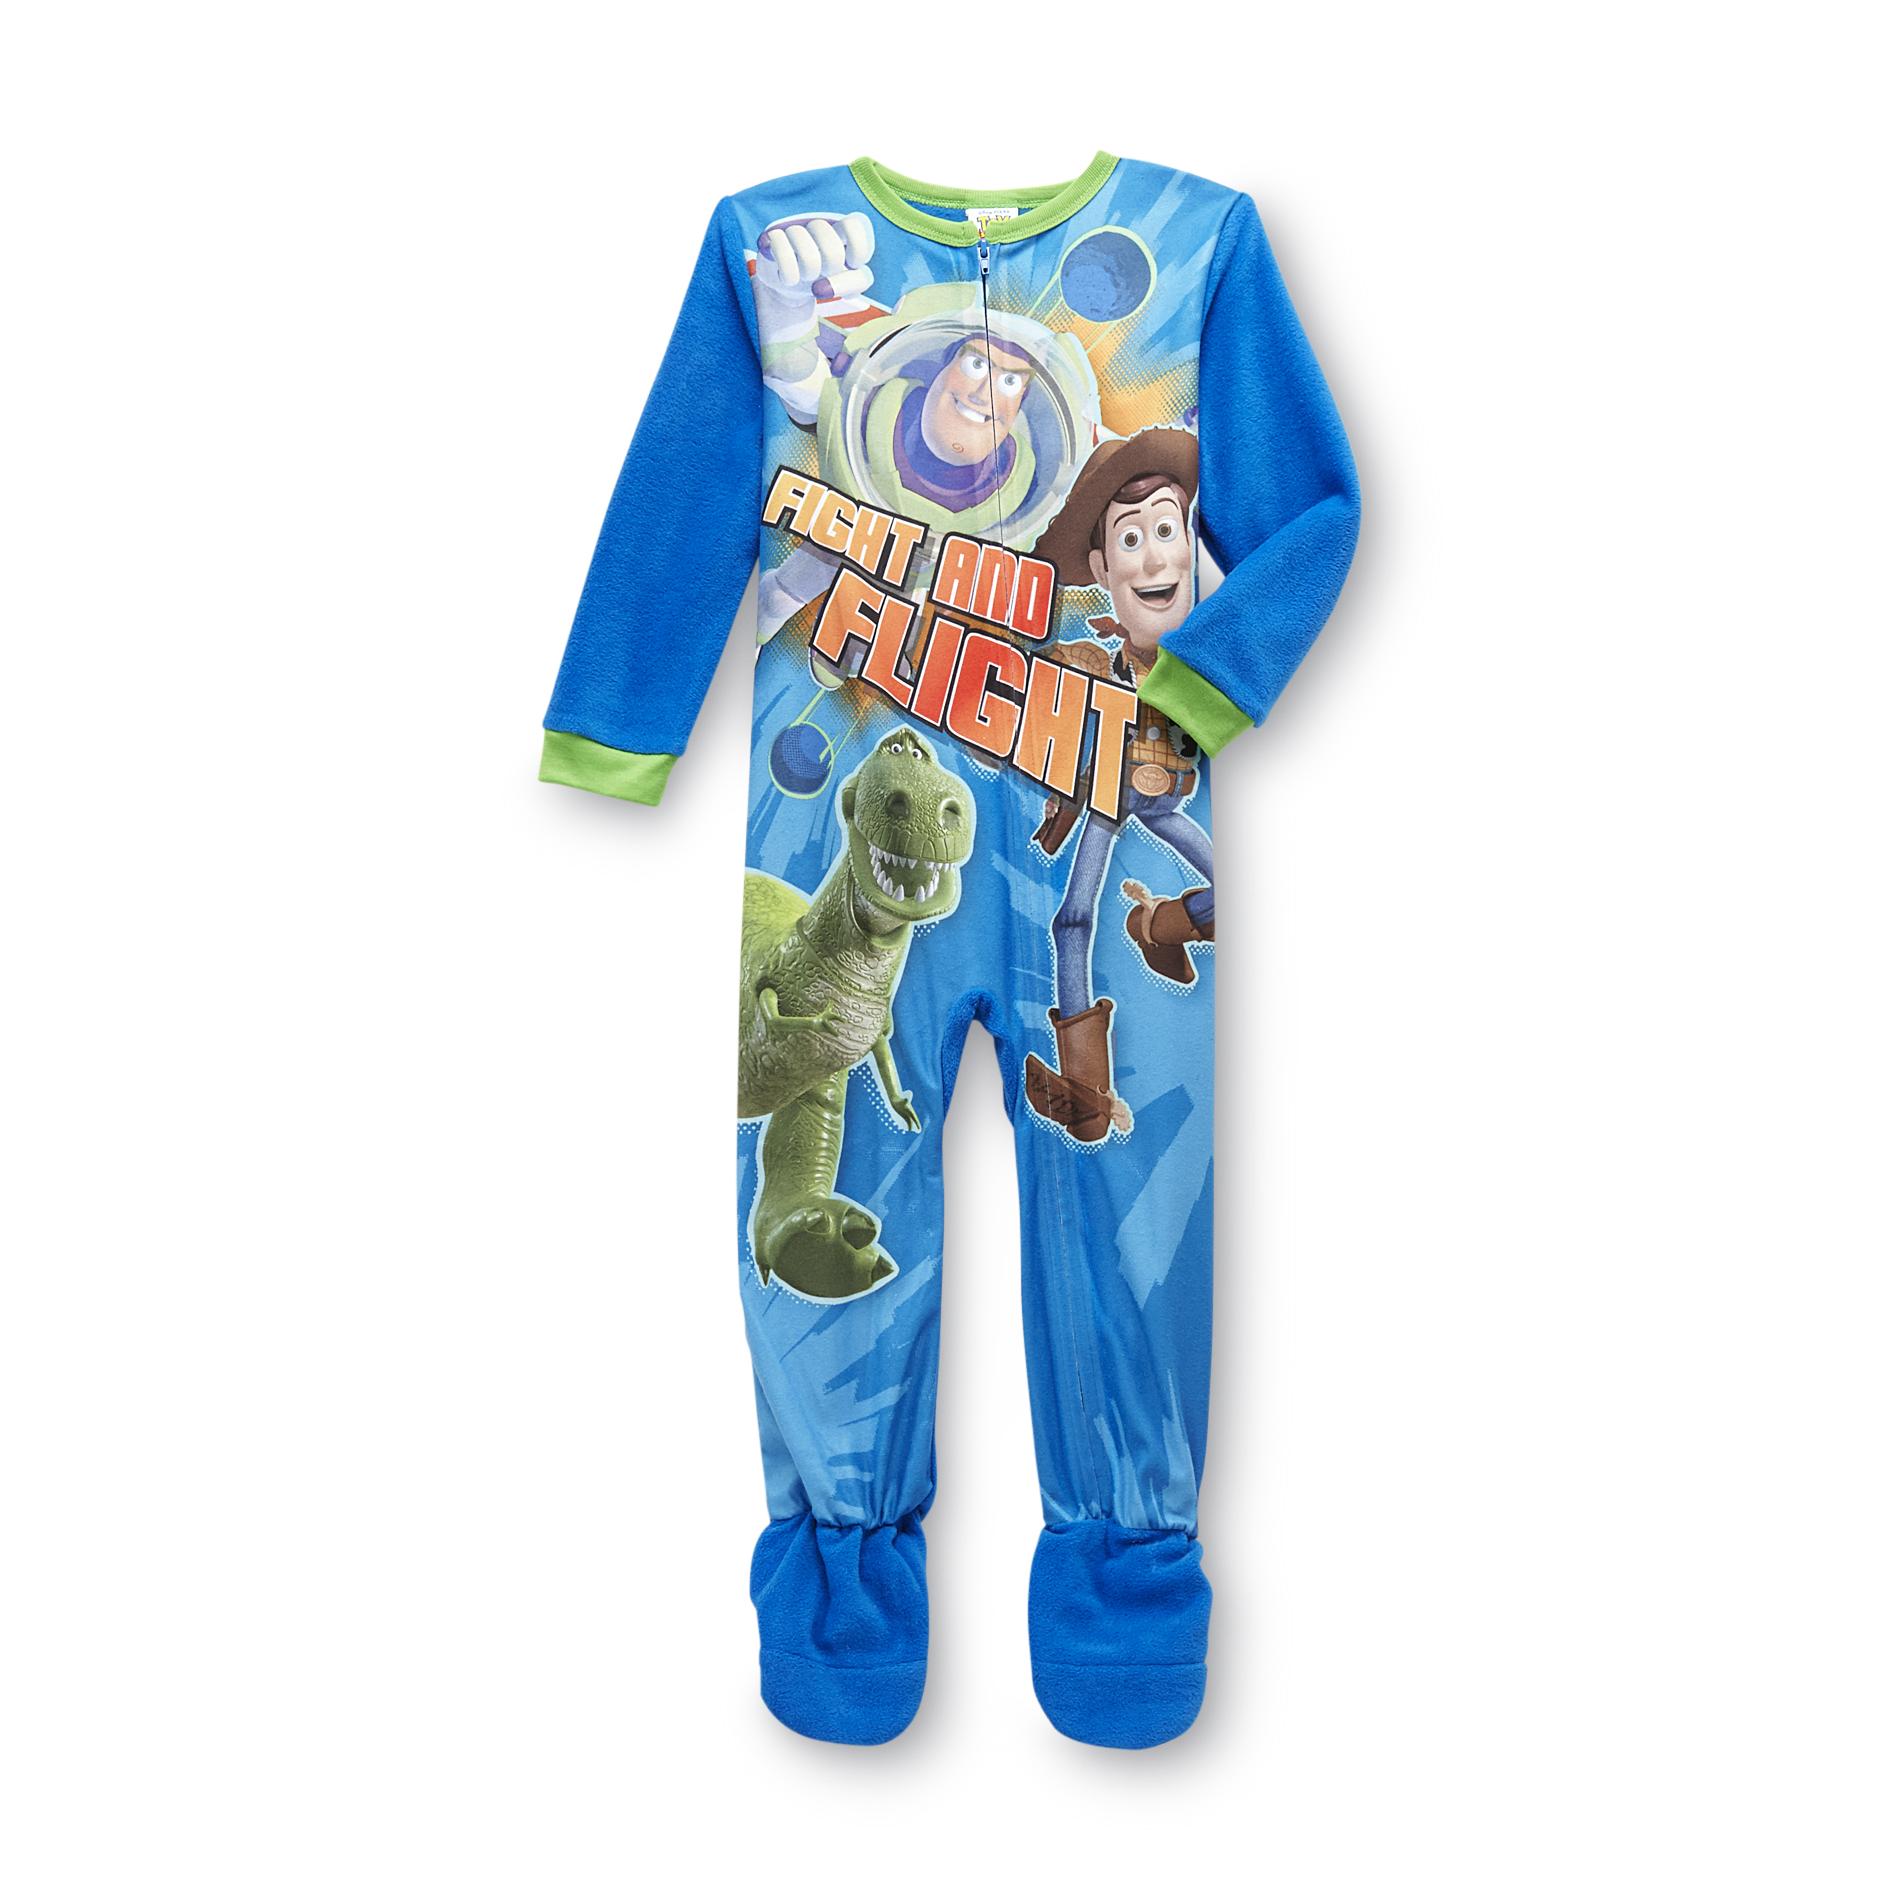 Disney Toy Story Infant & Toddler Boy's Fleece Footed Pajamas